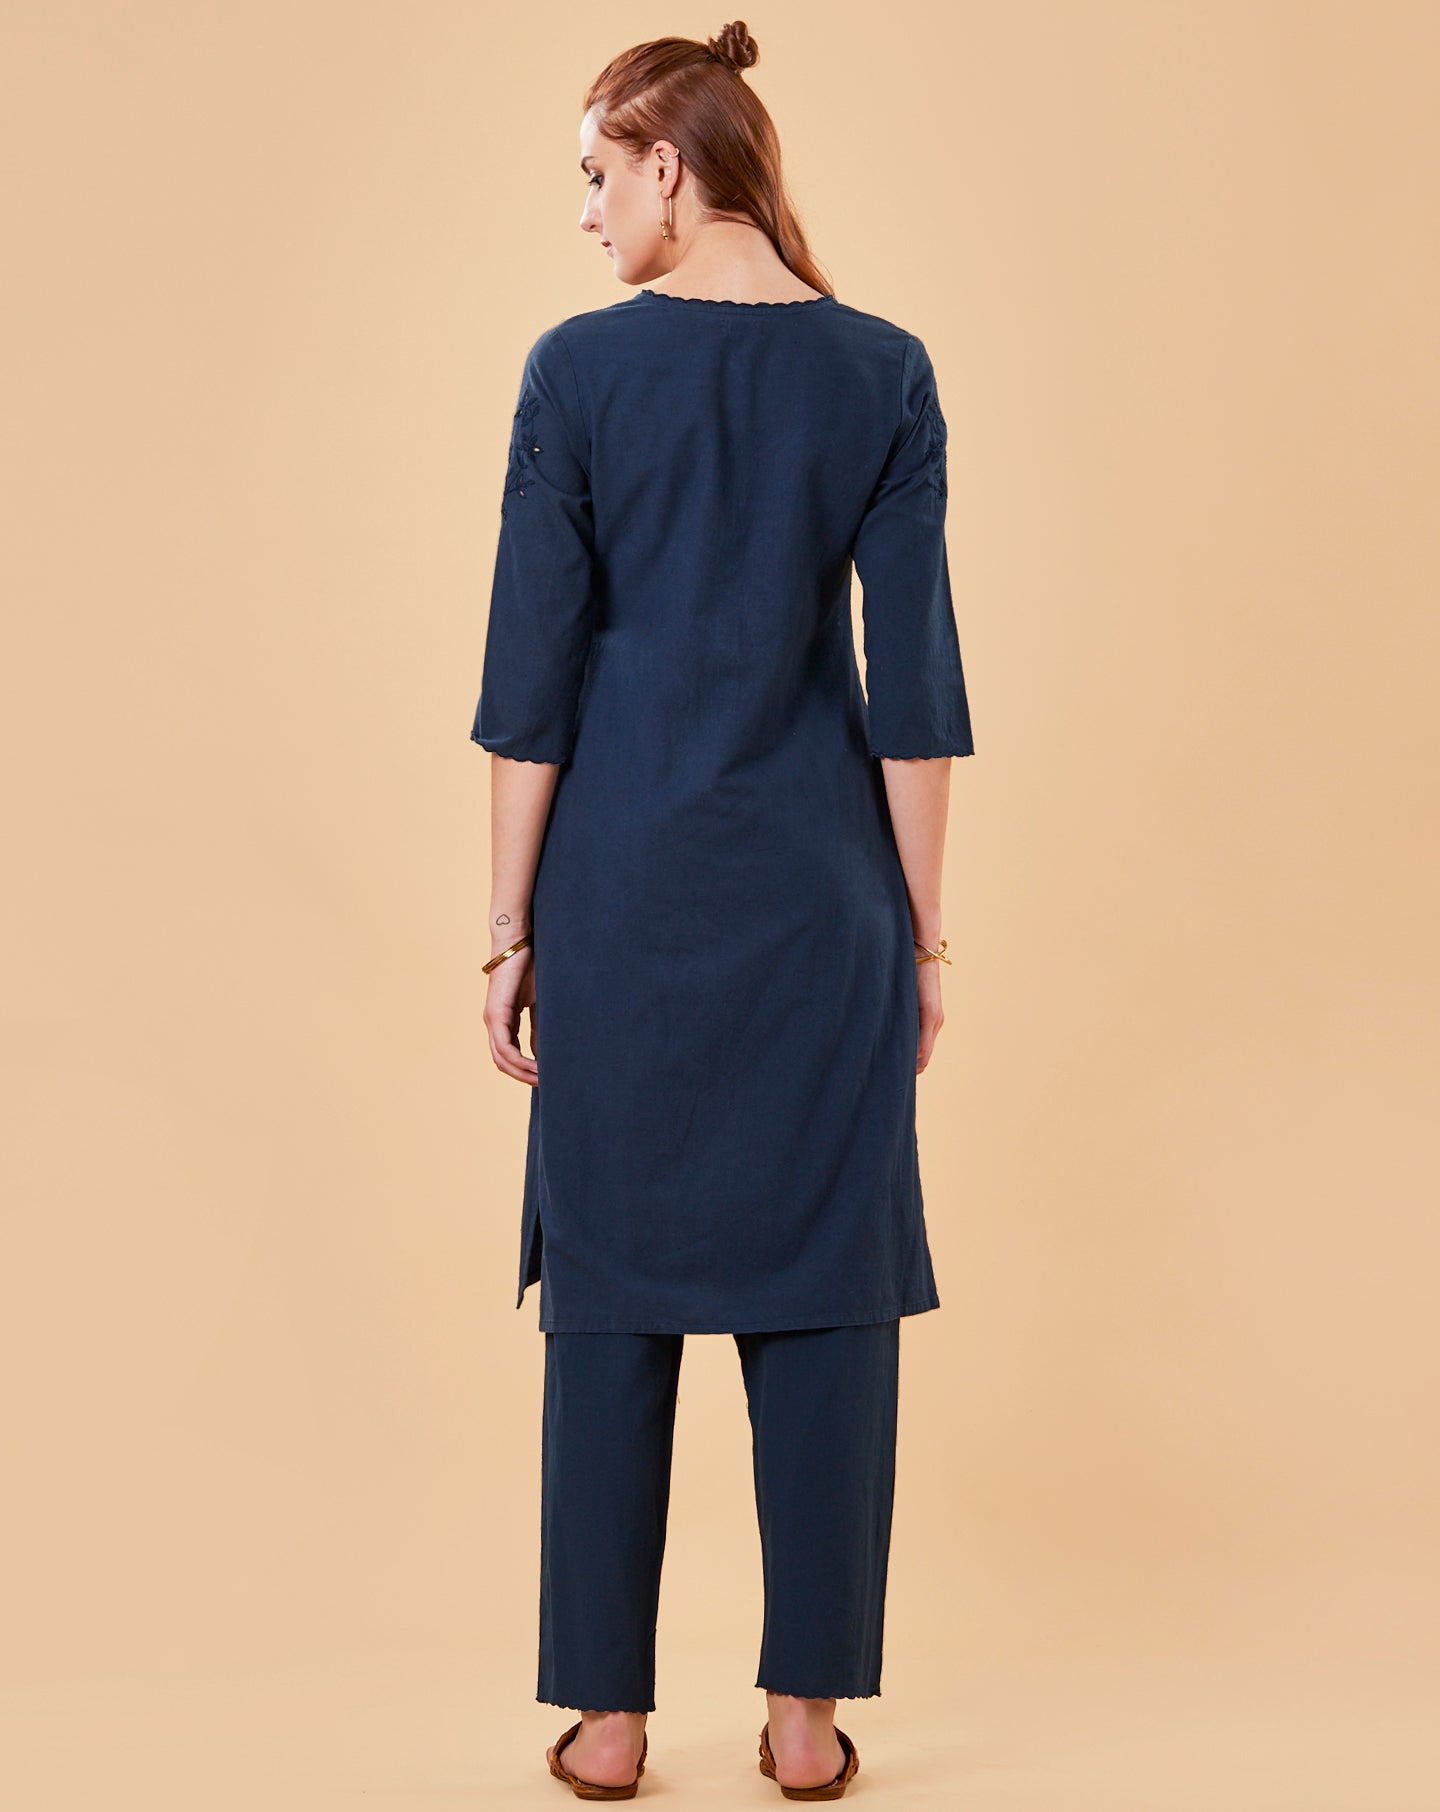 NAVY CUTWORK EMBROIDERED COTTON LINEN KURTA WITH PANTS